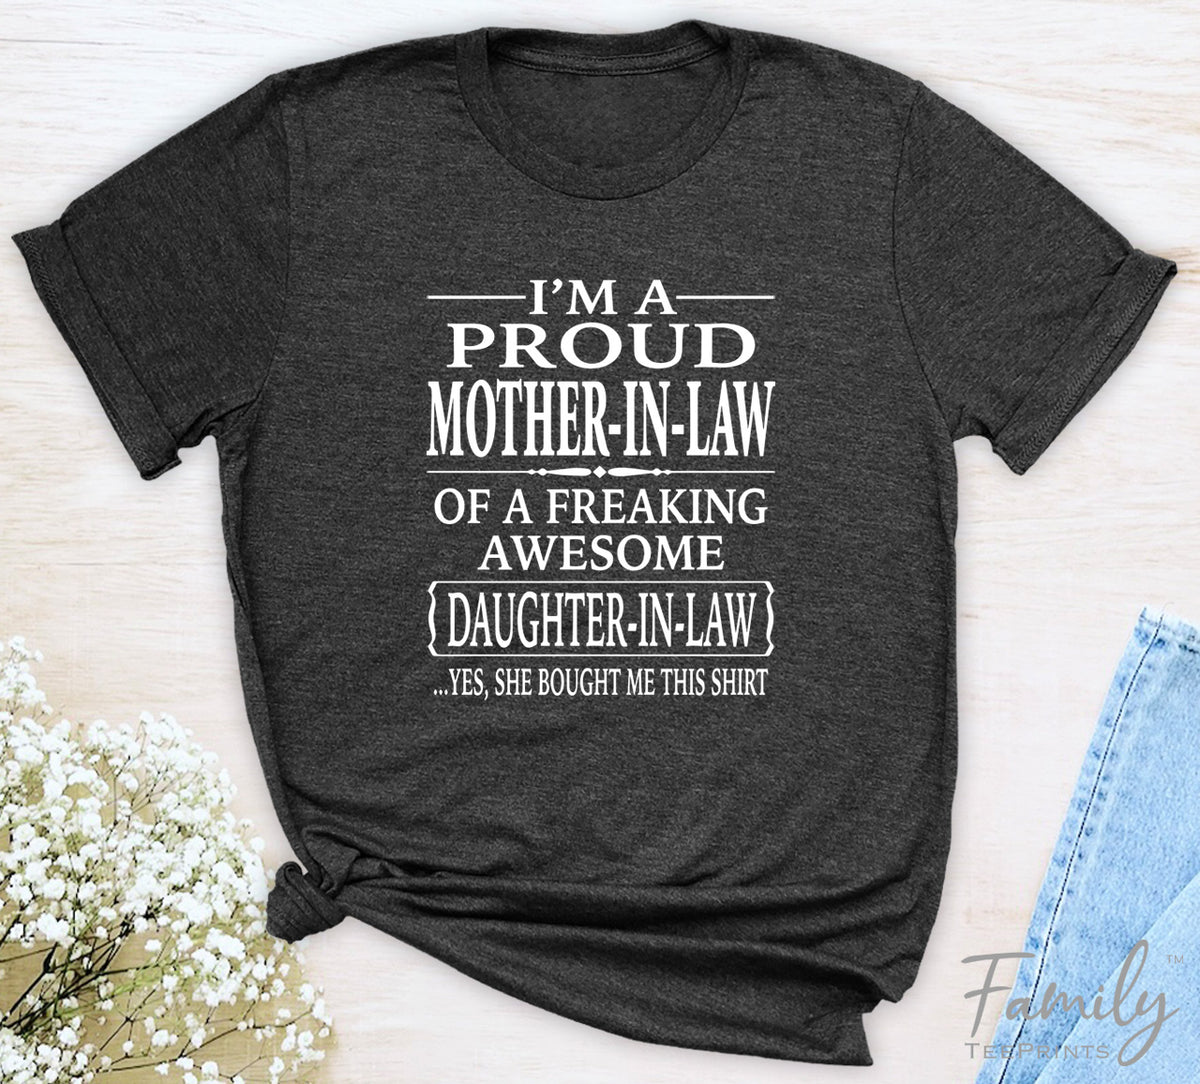 I'm A Proud Mother-In-Law Of A Freaking Awesome Daughter-In-Law - Unisex T-shirt - Mother-In-Law Shirt - Gift For Mother-In-Law